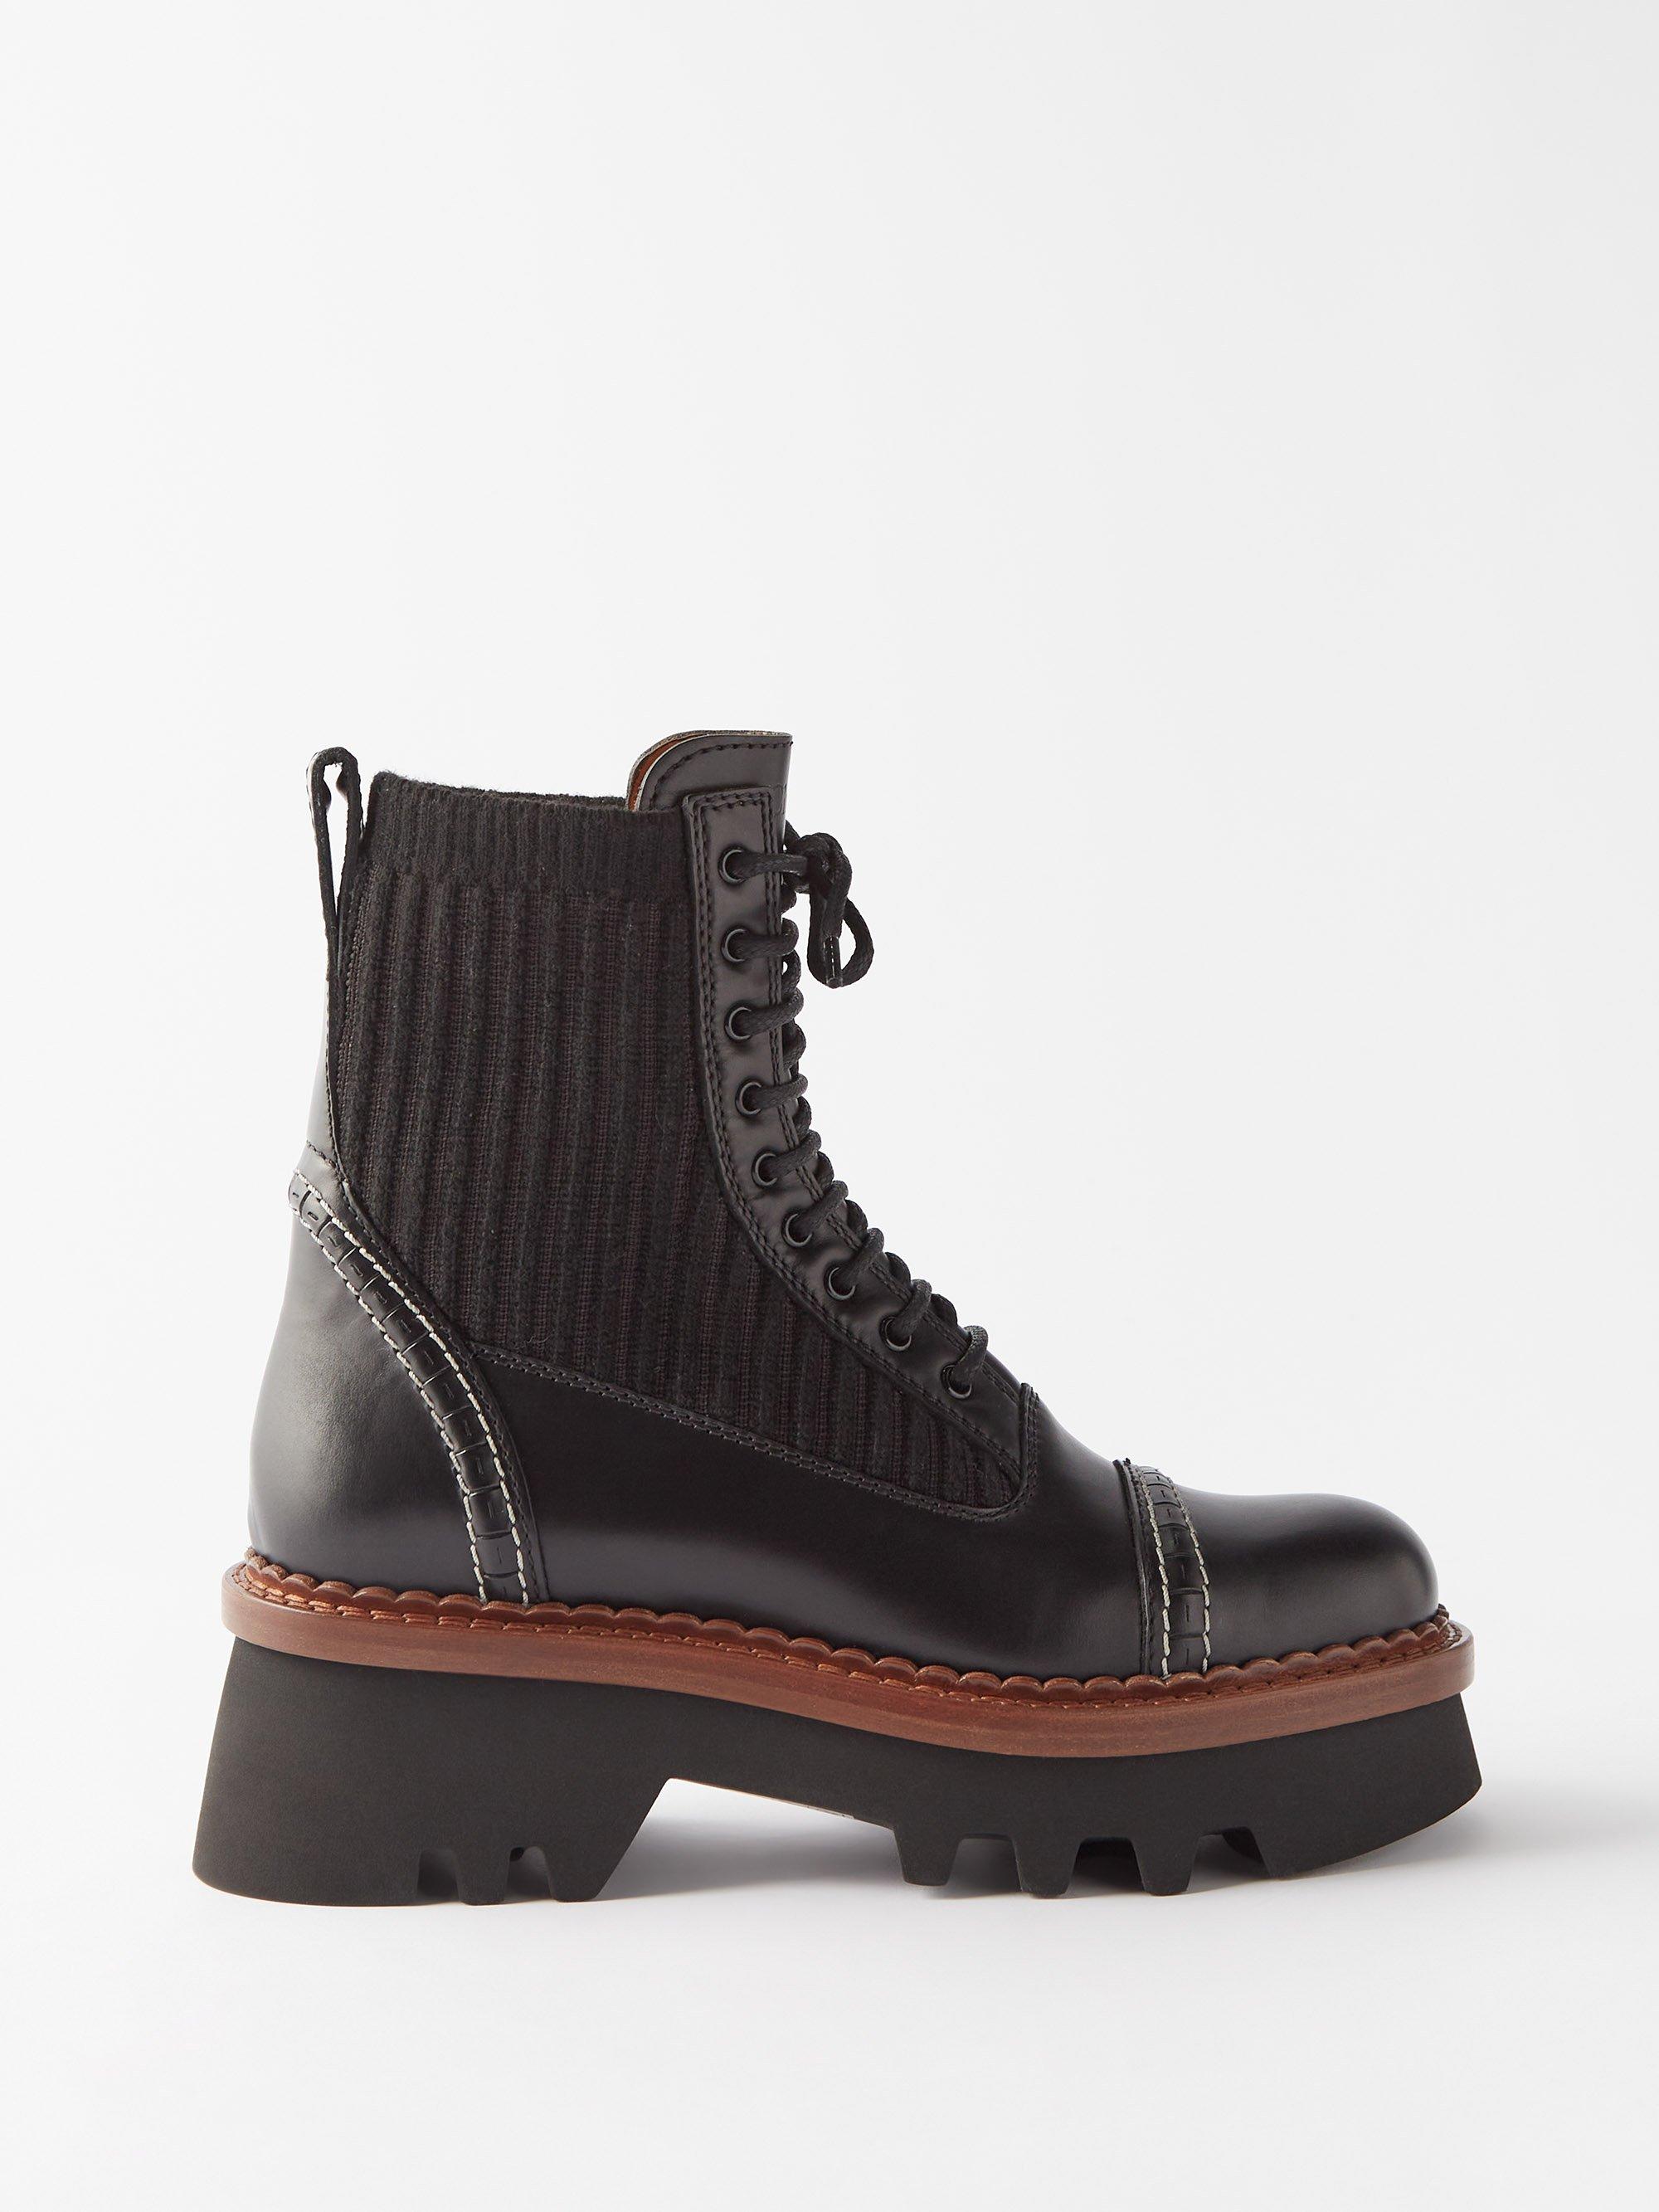 Chloé Owena Leather Lace-up Boots in Black | Lyst